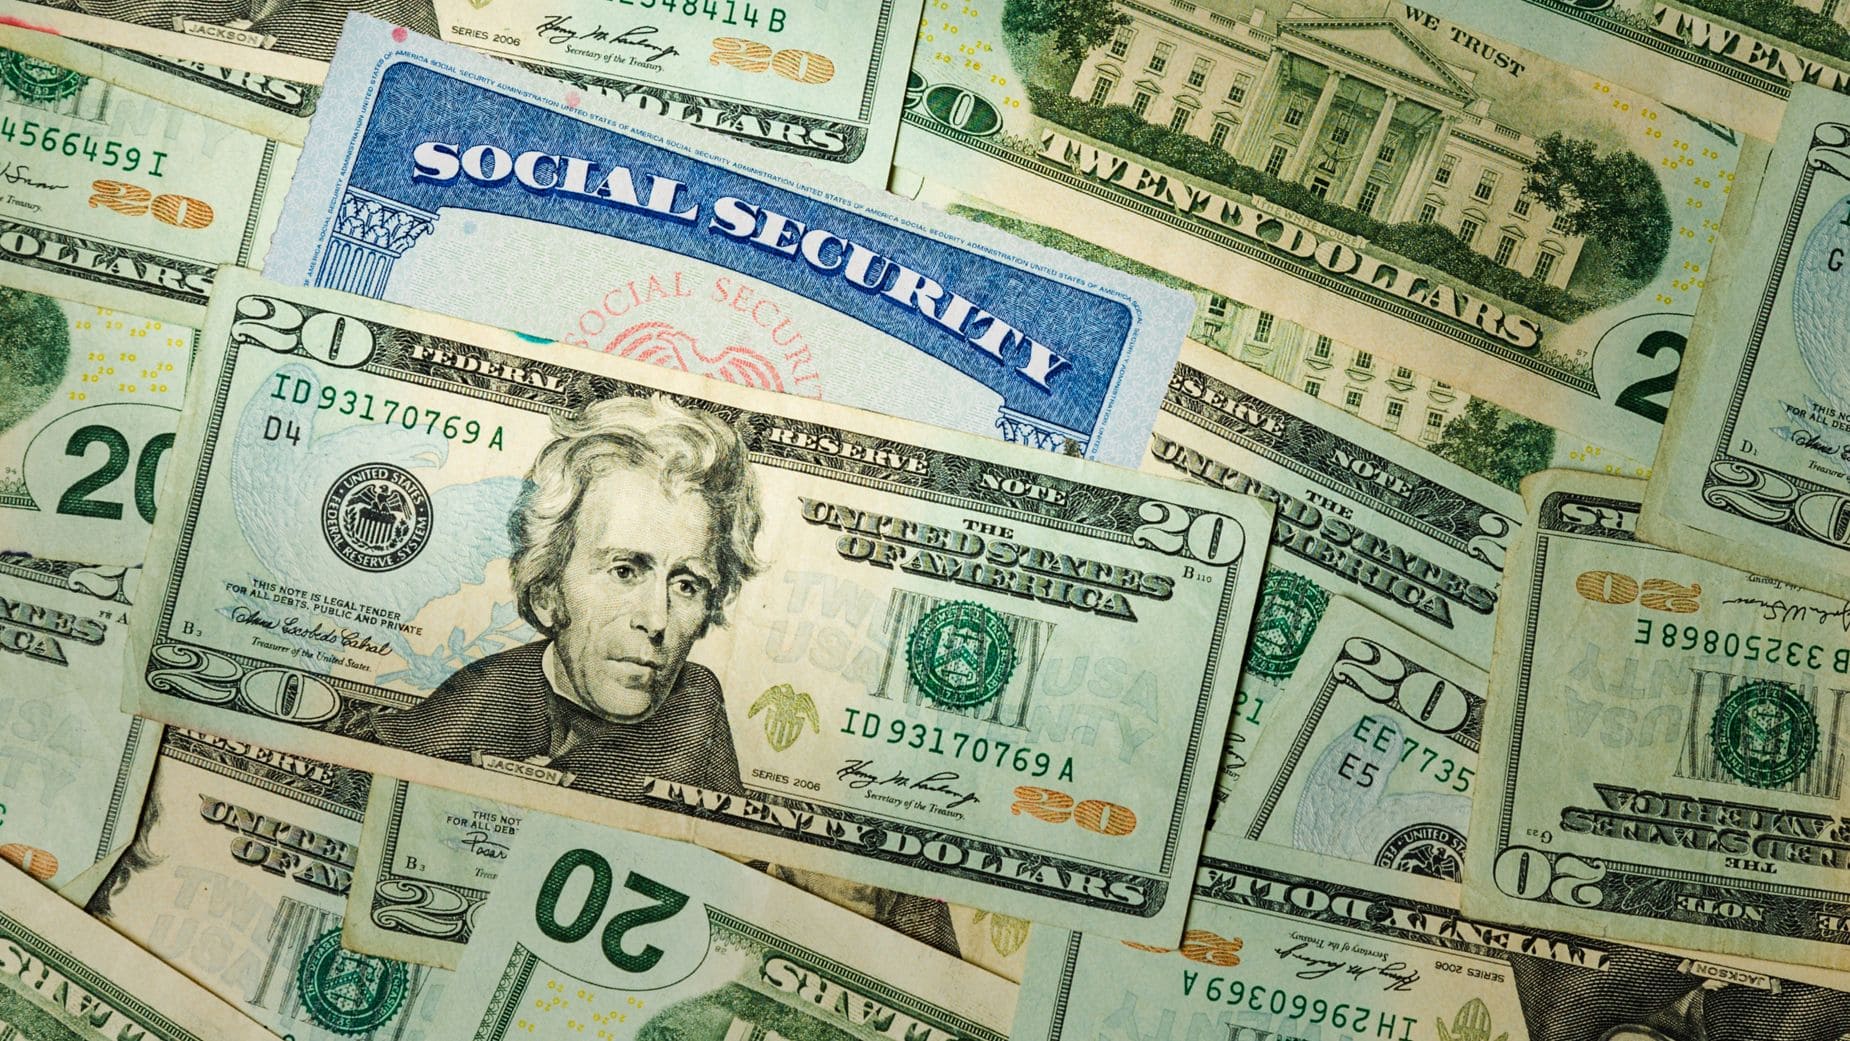 Social Security is sending the last payment in March